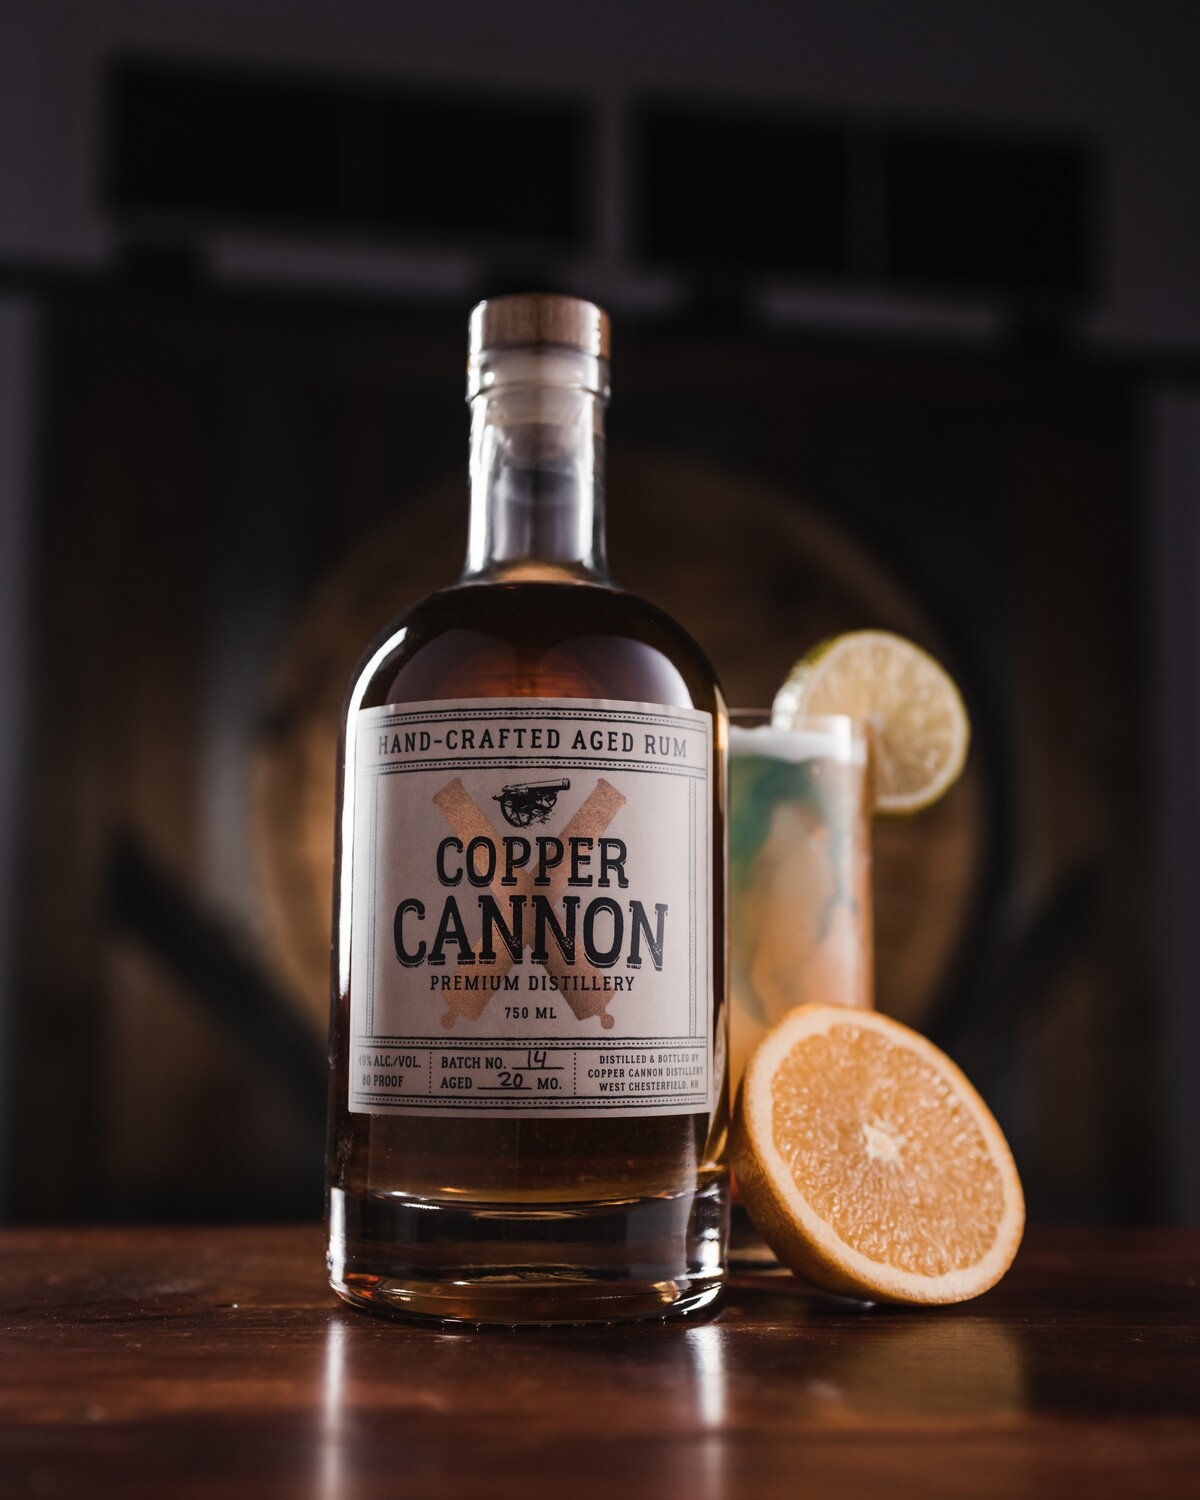 Copper Cannon Hand Crafted Barrel Aged Rum